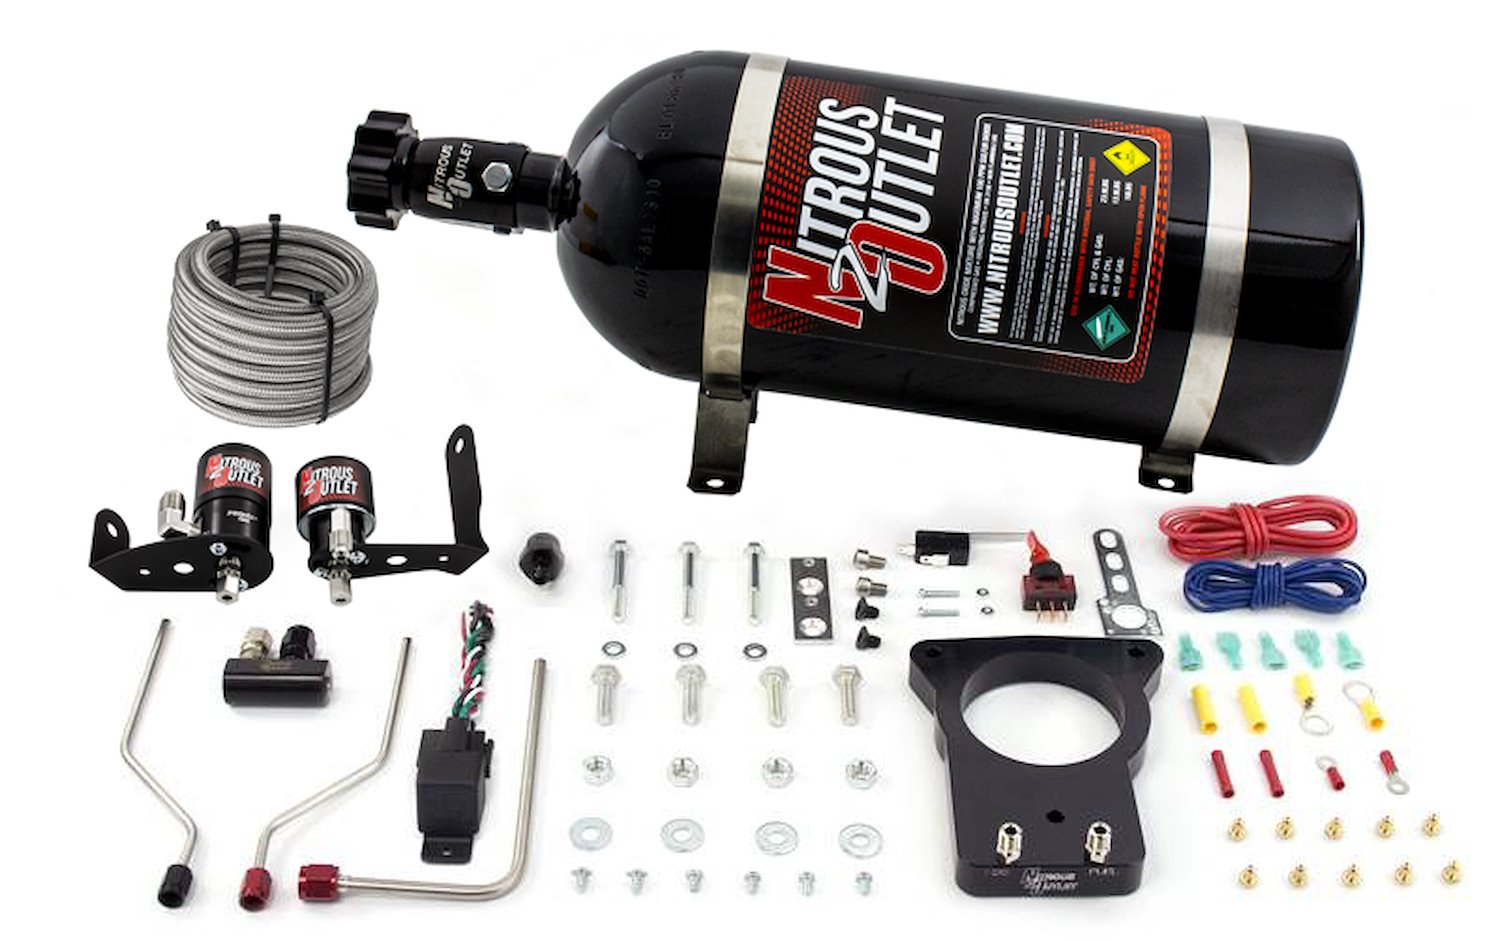 00-10126-78-00 Cadillac 78 mm 2004-2005 CTS-V Hard-Line Plate System, Gas/E85, 5-55psi, 50-200HP, No Bottle